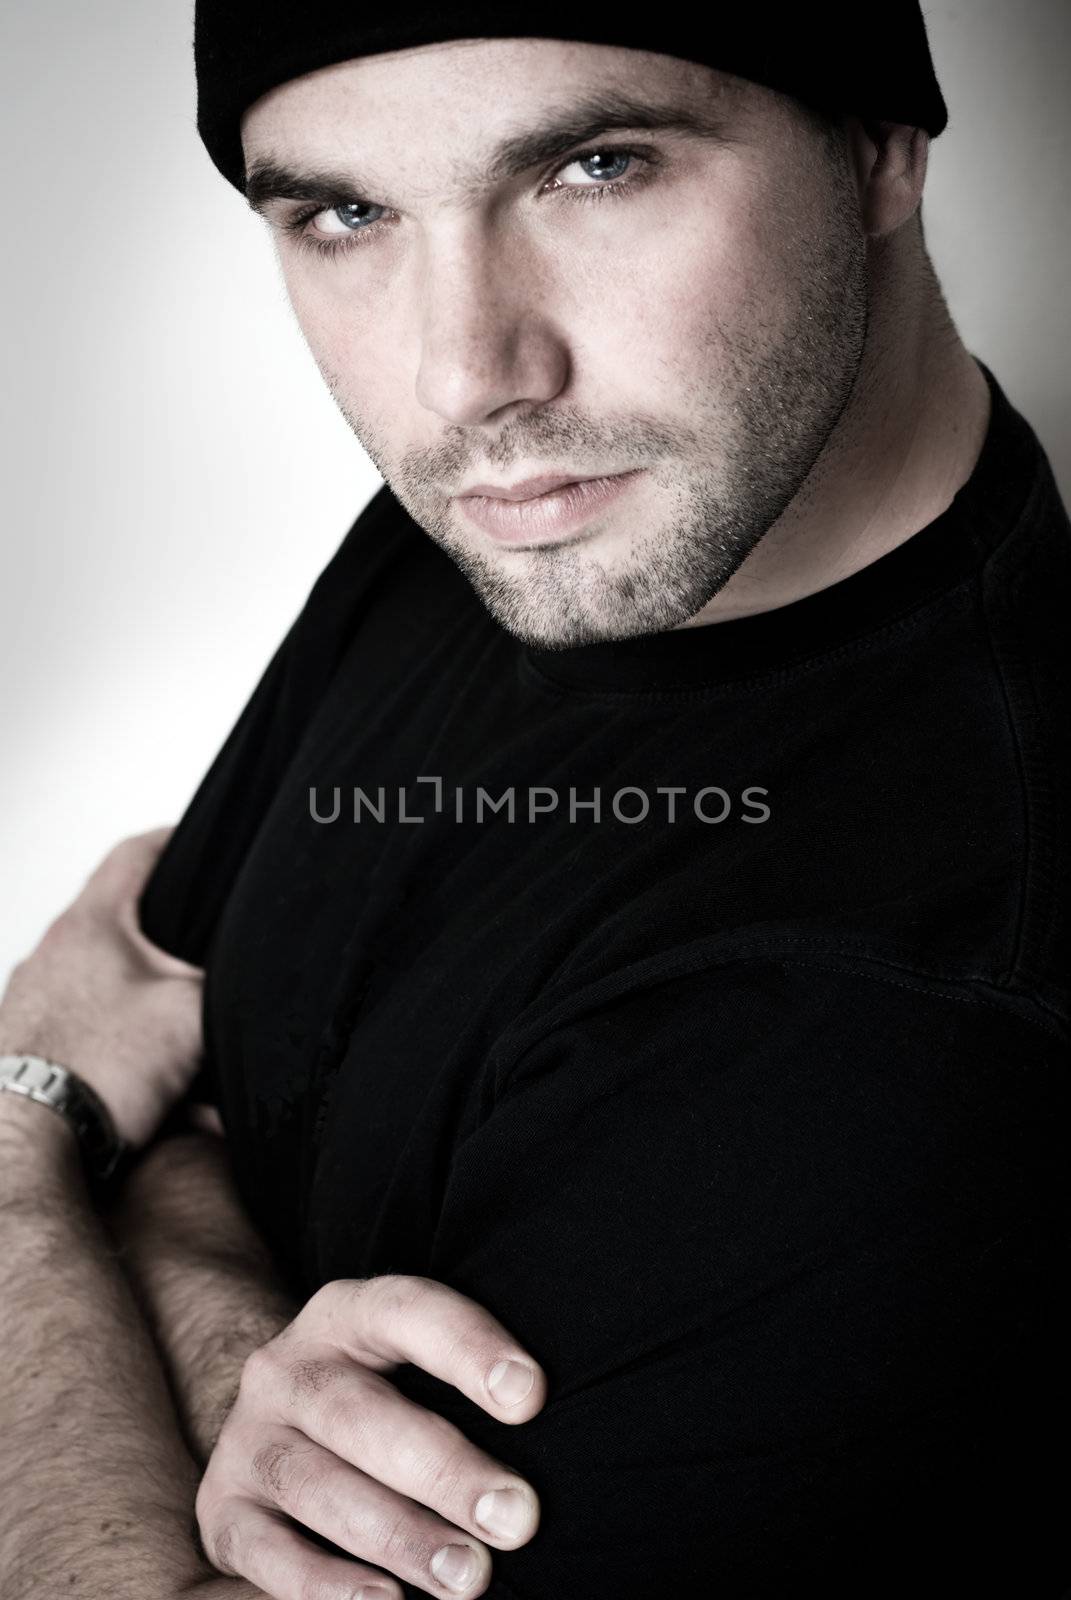 Portrait of young man with folded arms - selective focus on the model's right eye.